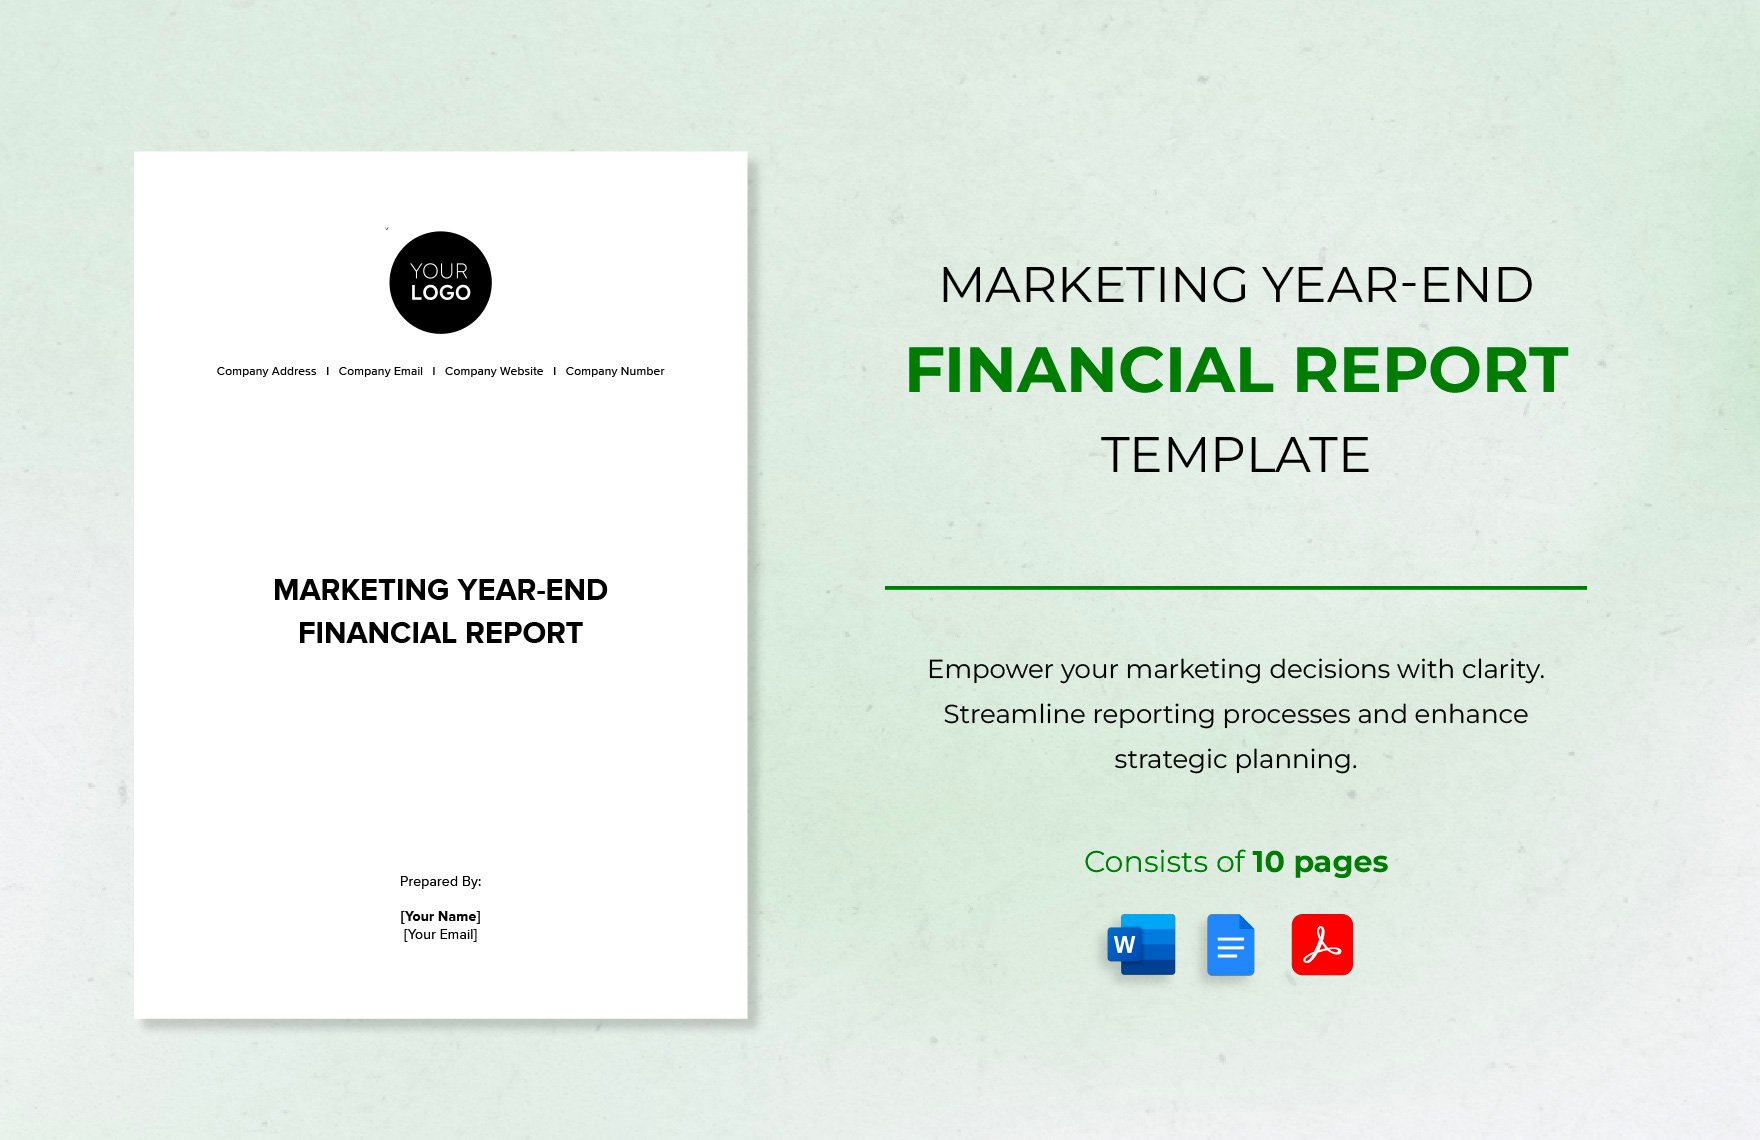 Marketing Year-end Financial Report Template in Word, Google Docs, PDF